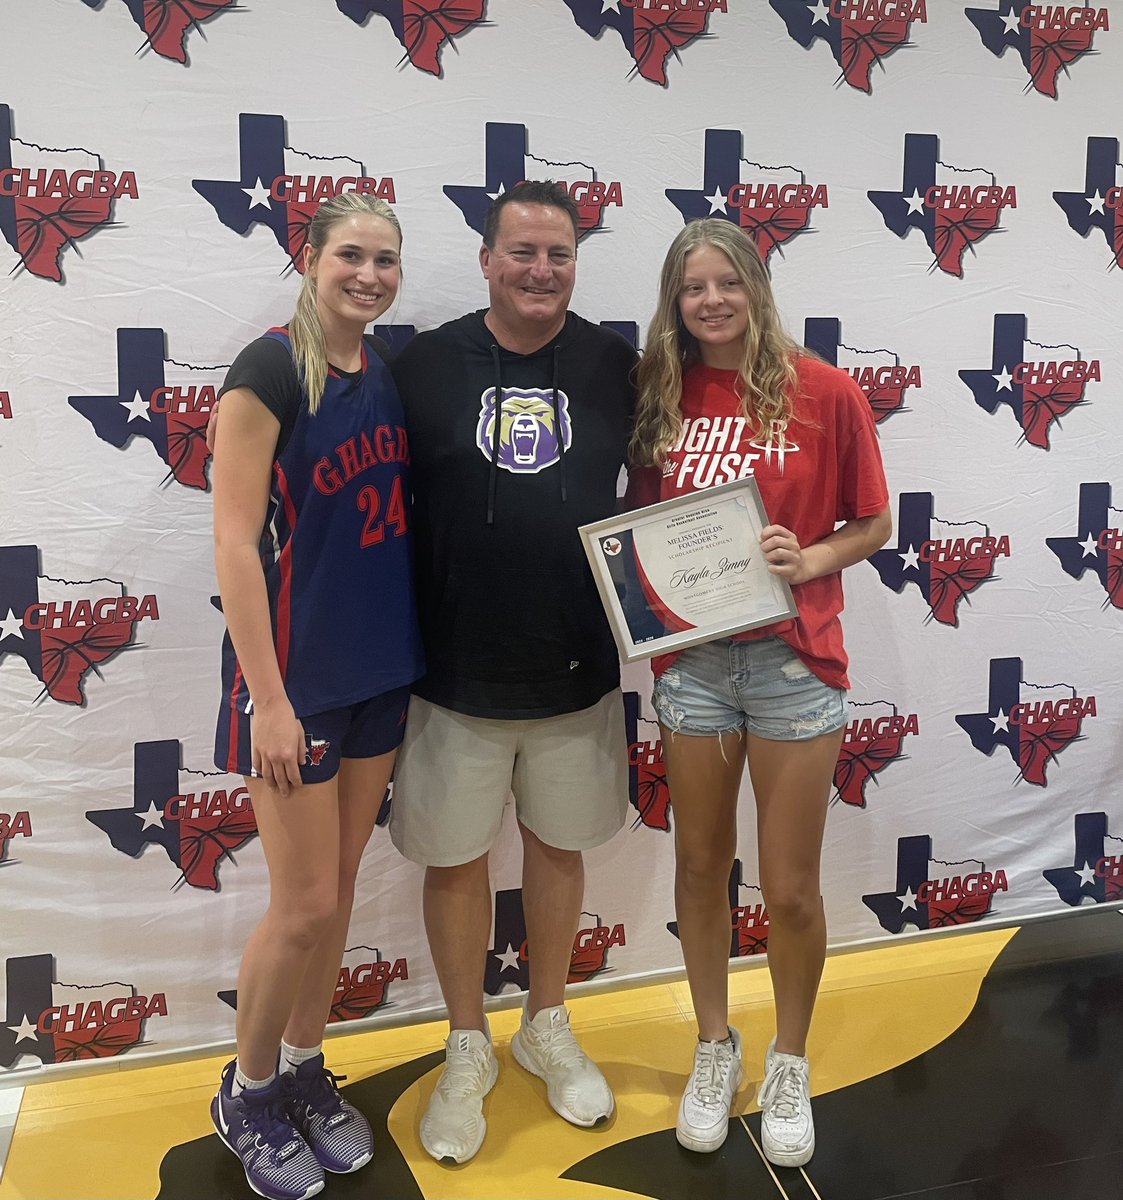 Congratulations to these MHS Bear seniors! Savannah played in the GHAGBA All Star game and Kayla was awarded the GHAGBA Founder’s Scholarship! Well deserved by both! Gonna miss these 2 🐻🏀💪 @ADHeard_MISD @mhs_bears @MontgomeryISD @Savannah8810 @Kayla_Zimny @coachcooper_mhs